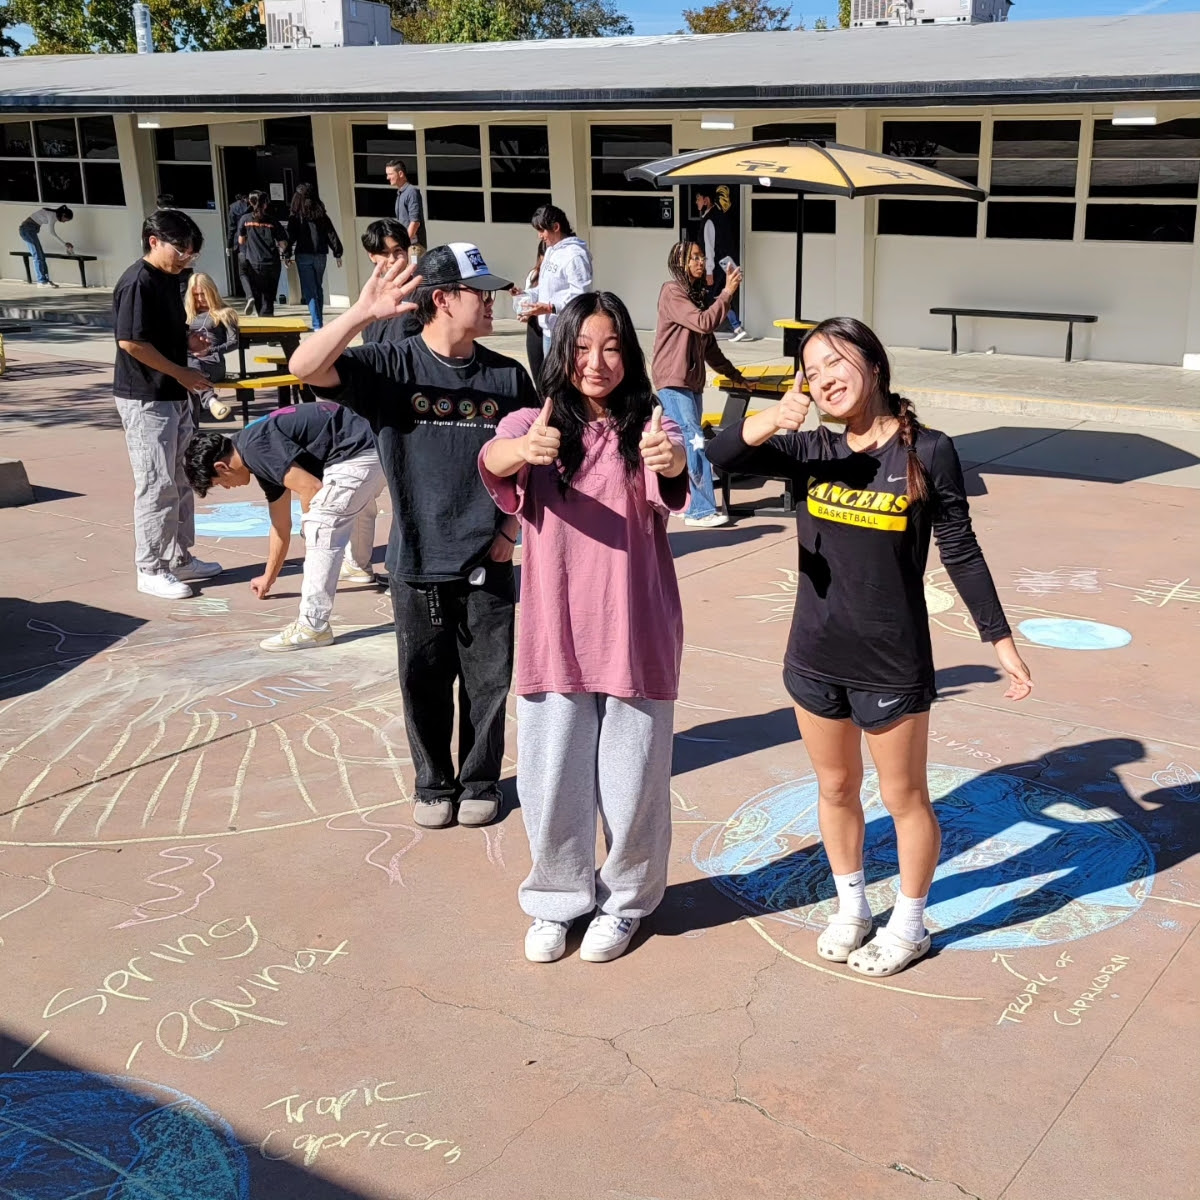  Juniors Olivia Ko (center) and Euree Kim stand near their chalk drawings during fourth period in Advanced Placement Environmental Sciences teacher Wesley Fairall’s class between the 80s and 100s buildings on Tuesday, Nov. 14, when the network outage first hit districtwide. While the class usually works digitally, Fairall adjusted to the lack of internet access with the activity.
